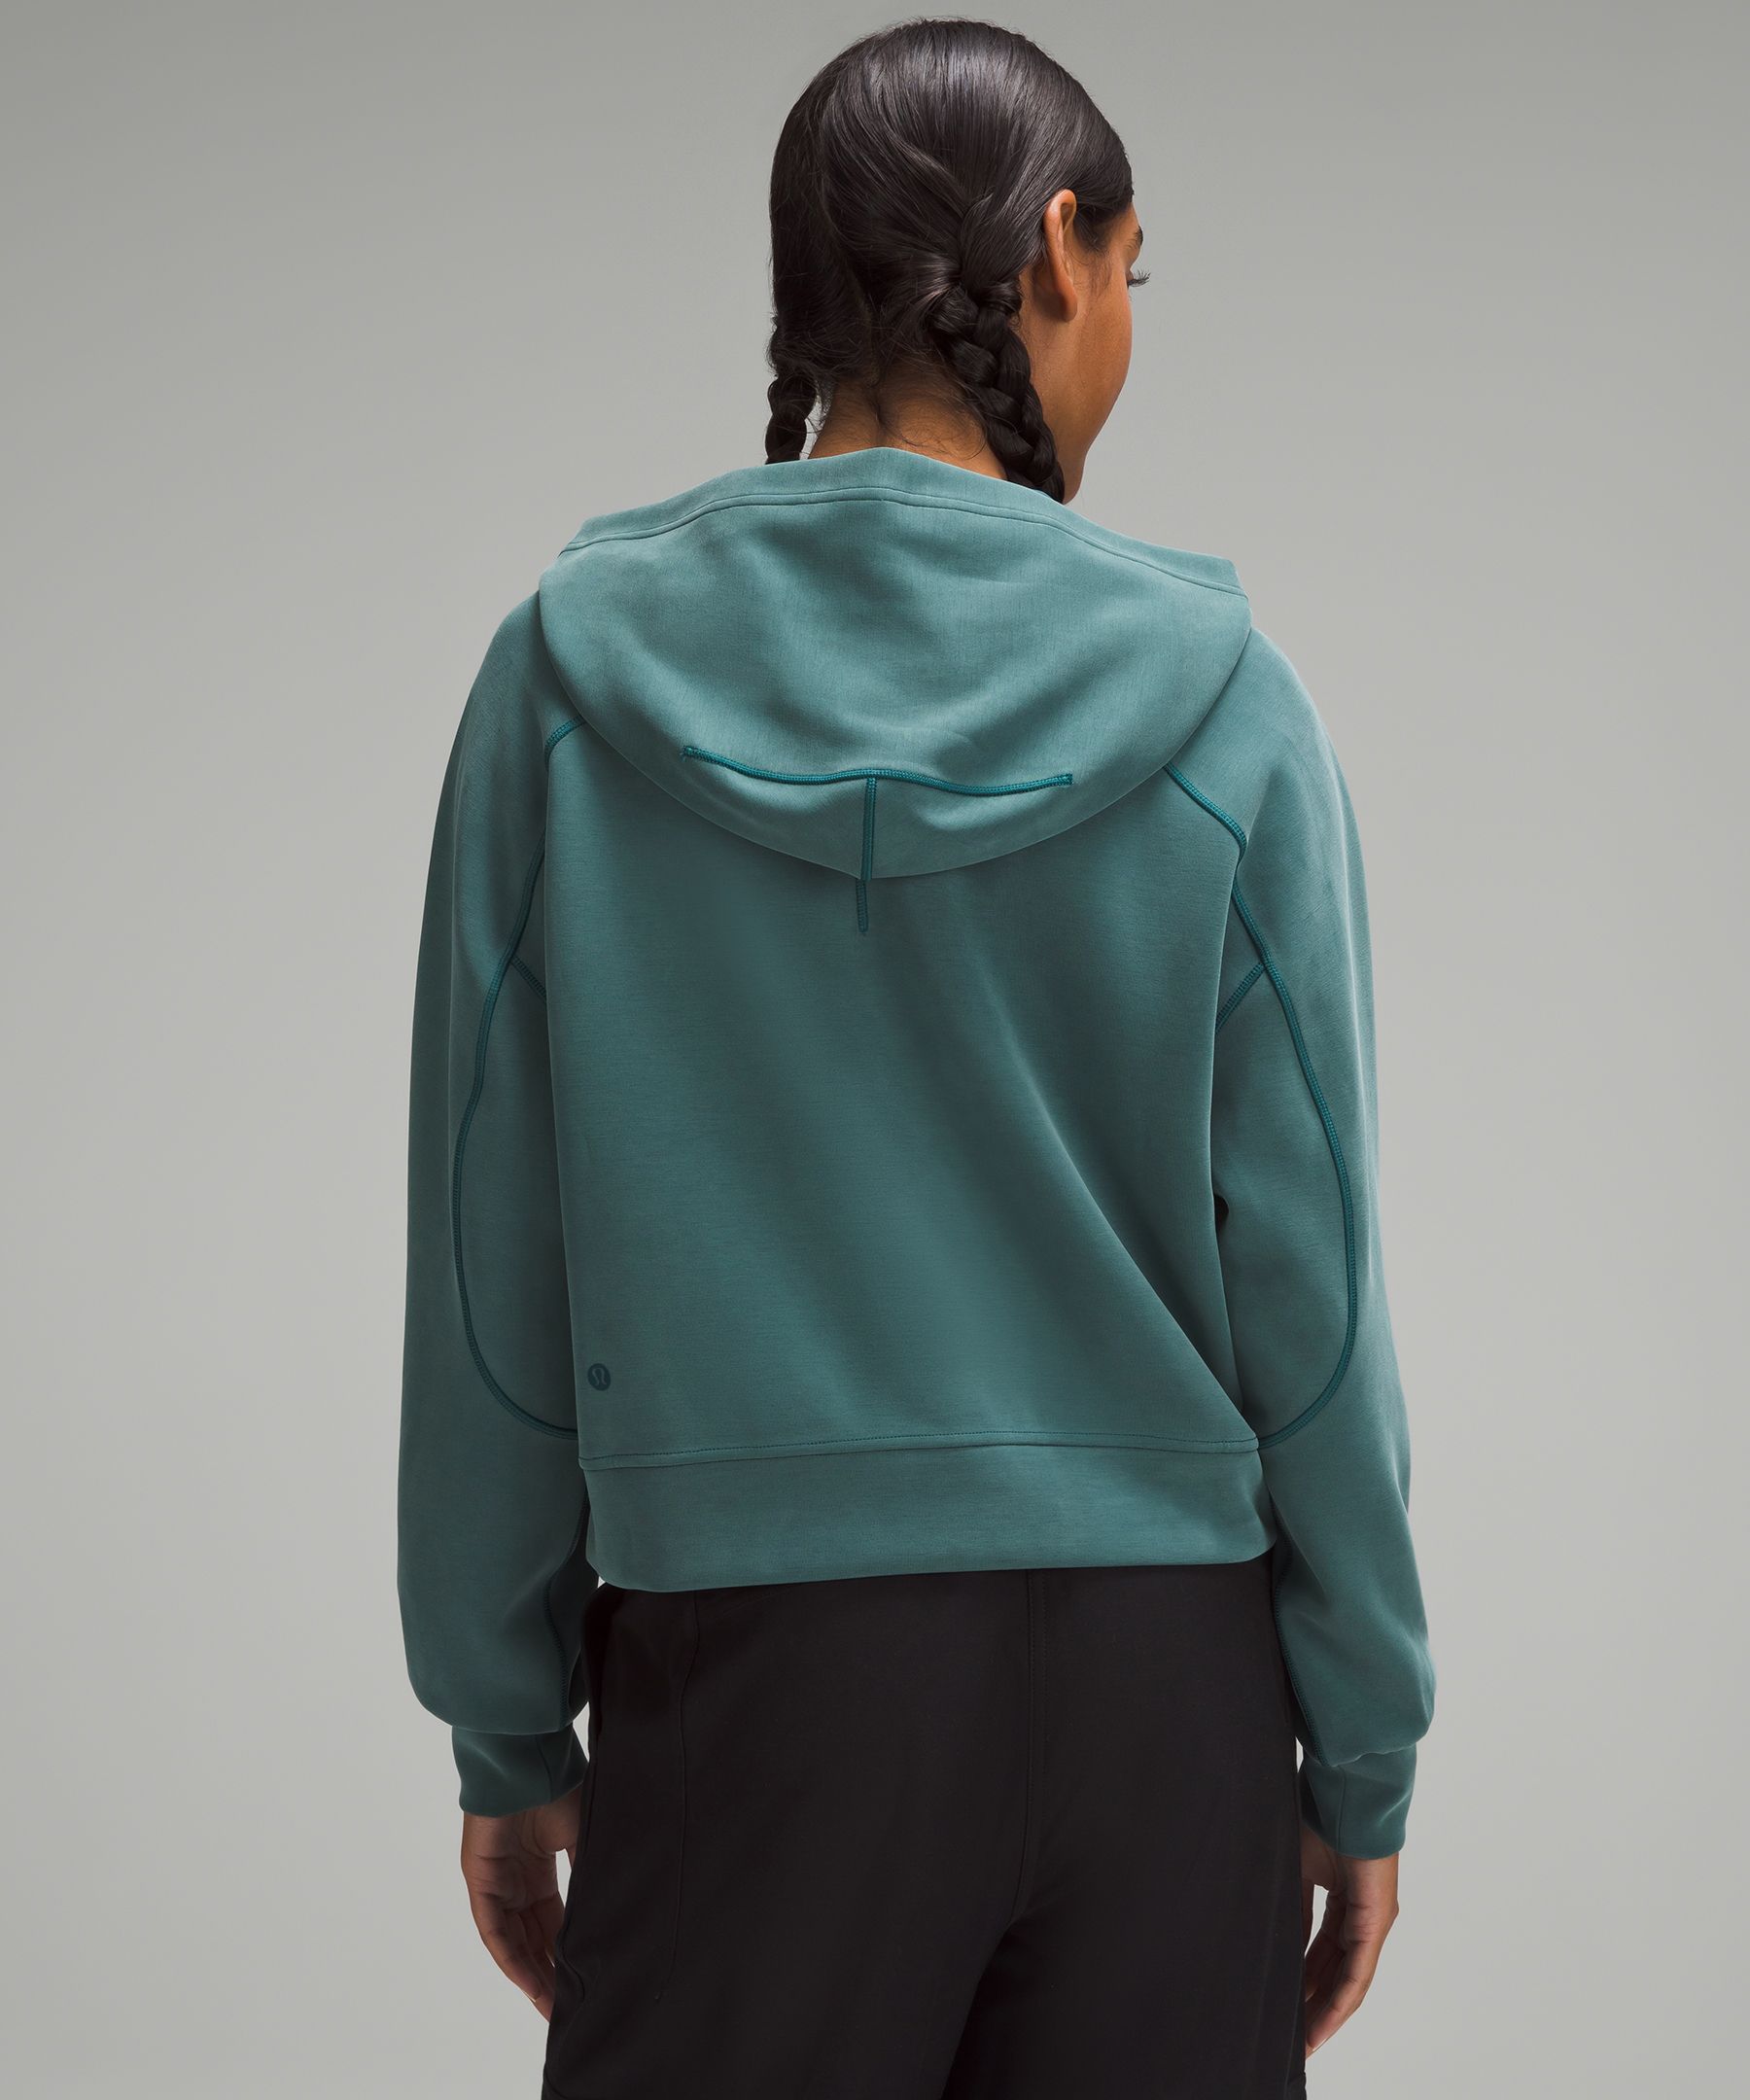 Lululemon Blue Restless Hoodie Size Small – The Trove Guam